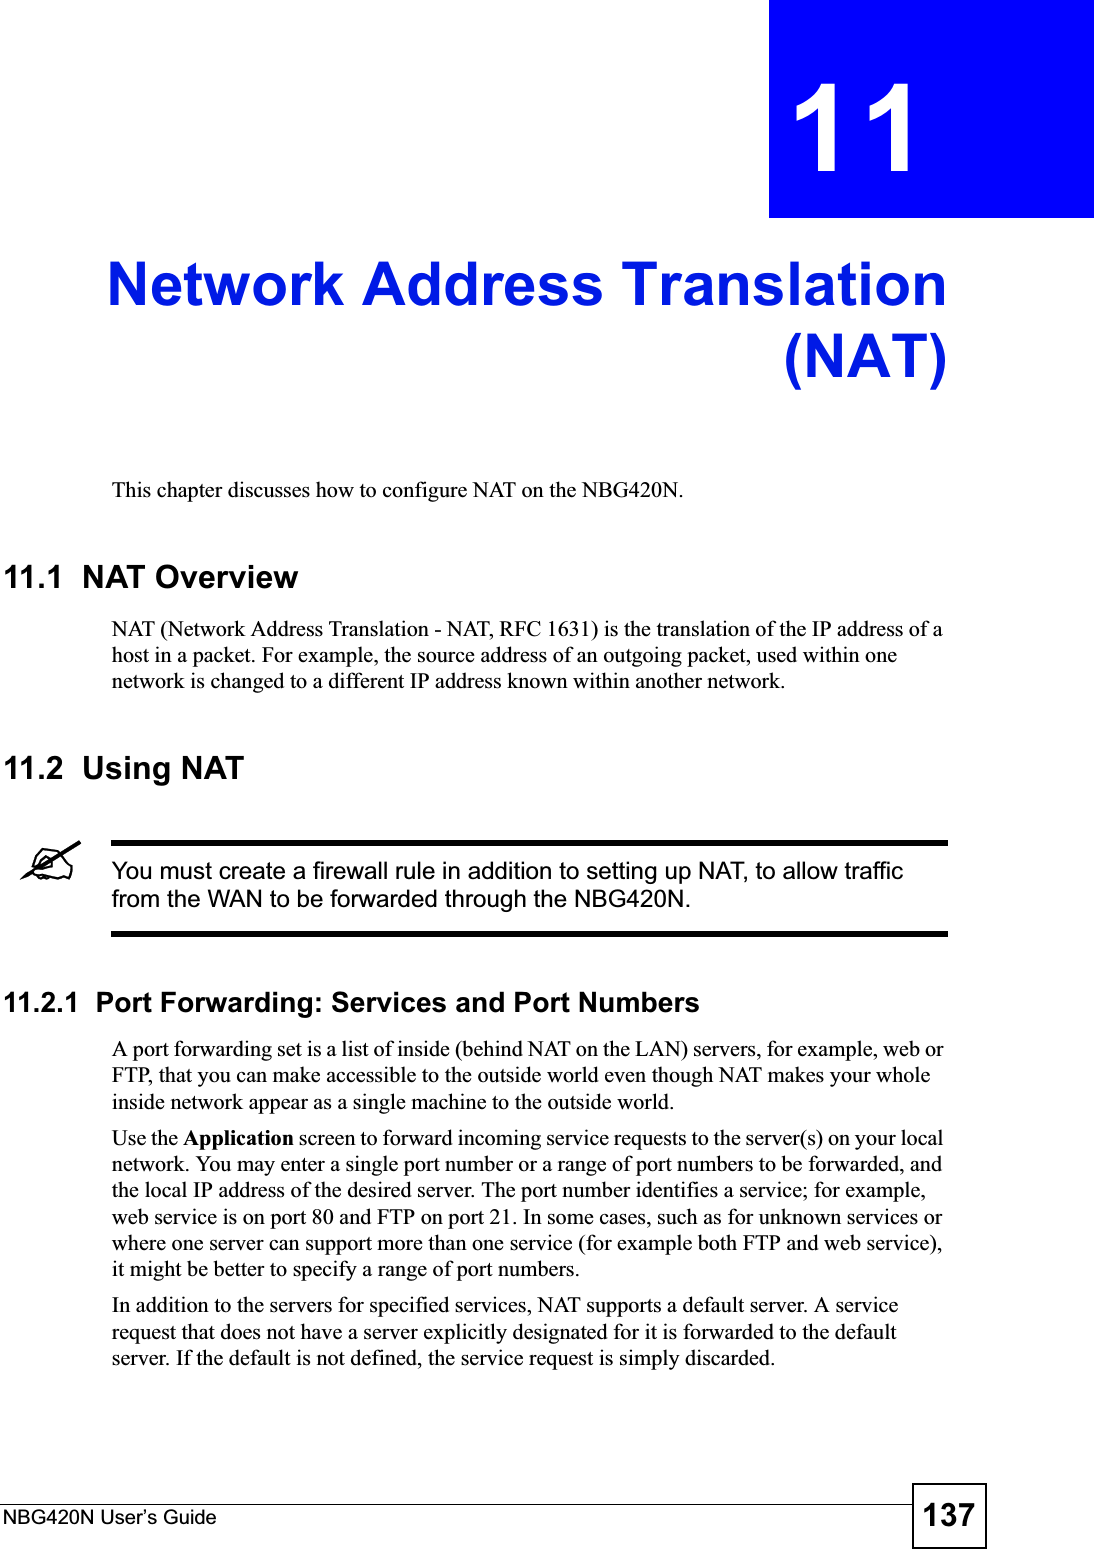 NBG420N User’s Guide 137CHAPTER 11 Network Address Translation(NAT)This chapter discusses how to configure NAT on the NBG420N.11.1  NAT Overview   NAT (Network Address Translation - NAT, RFC 1631) is the translation of the IP address of a host in a packet. For example, the source address of an outgoing packet, used within one network is changed to a different IP address known within another network.11.2  Using NAT&quot;You must create a firewall rule in addition to setting up NAT, to allow traffic from the WAN to be forwarded through the NBG420N.11.2.1  Port Forwarding: Services and Port NumbersA port forwarding set is a list of inside (behind NAT on the LAN) servers, for example, web or FTP, that you can make accessible to the outside world even though NAT makes your whole inside network appear as a single machine to the outside world. Use the Application screen to forward incoming service requests to the server(s) on your local network. You may enter a single port number or a range of port numbers to be forwarded, and the local IP address of the desired server. The port number identifies a service; for example, web service is on port 80 and FTP on port 21. In some cases, such as for unknown services or where one server can support more than one service (for example both FTP and web service), it might be better to specify a range of port numbers.In addition to the servers for specified services, NAT supports a default server. A service request that does not have a server explicitly designated for it is forwarded to the default server. If the default is not defined, the service request is simply discarded.